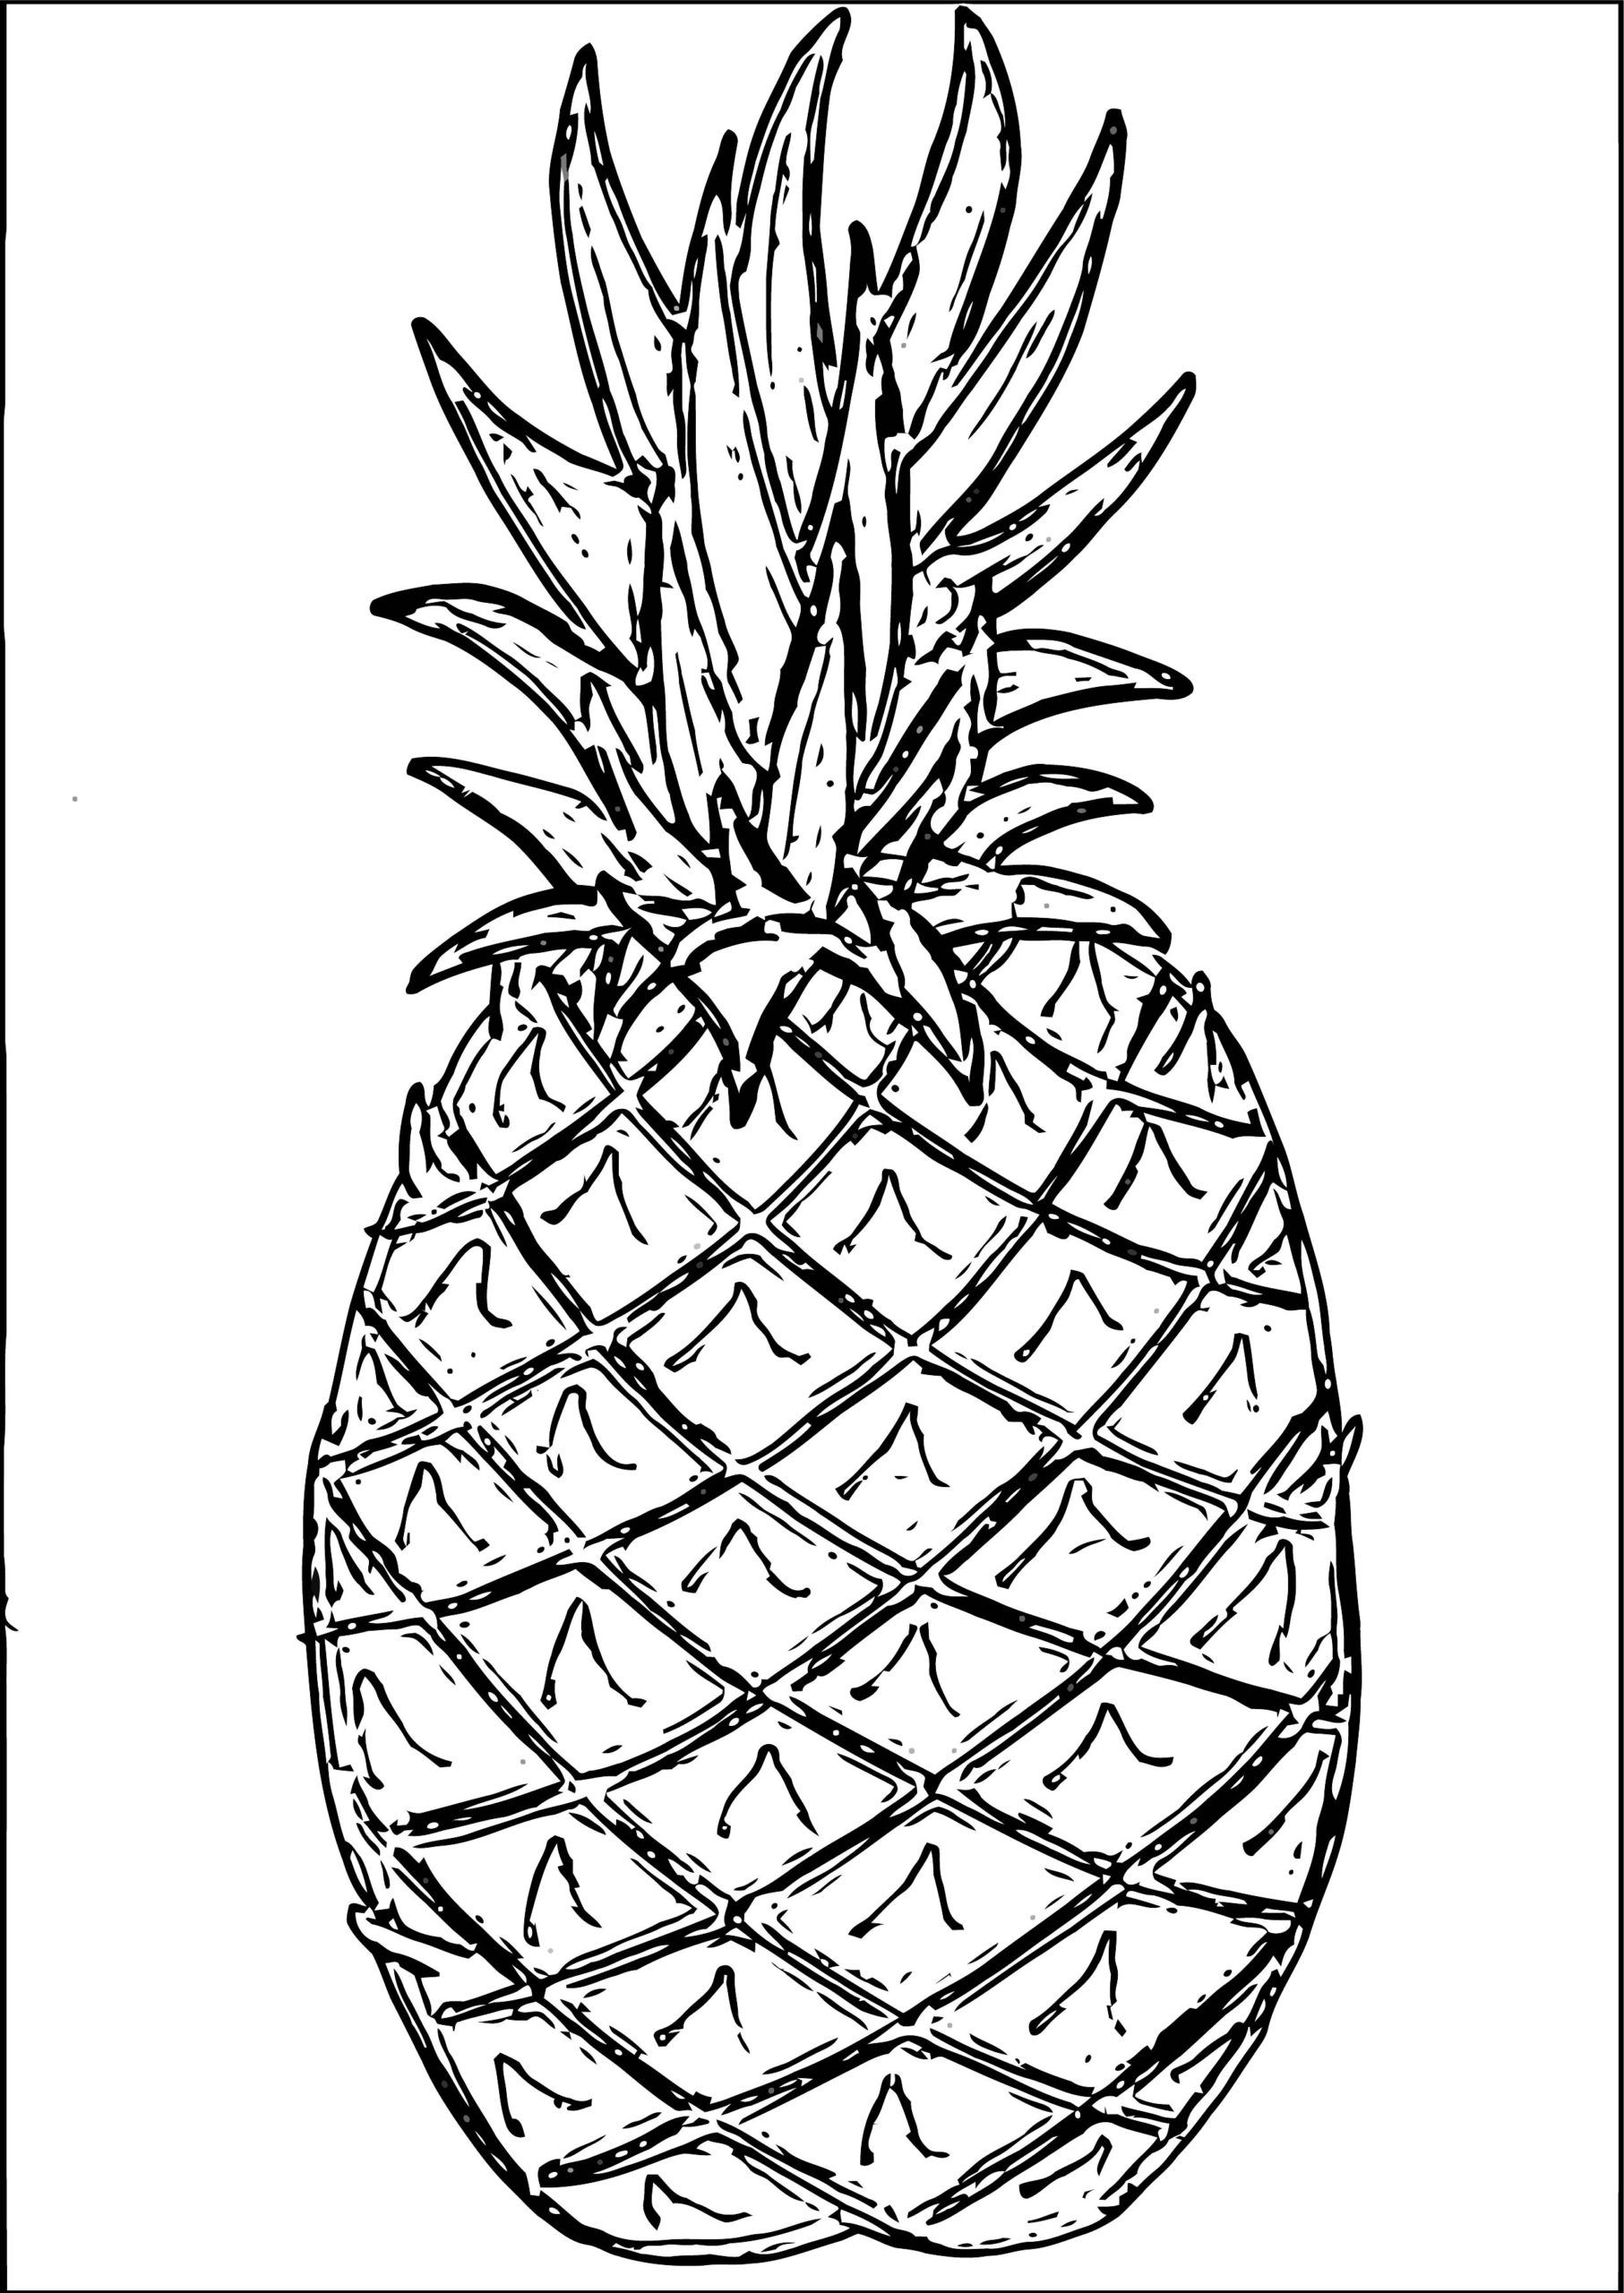 Coloring pages coloring pages for kids pineapple coloringage sheets kidsineapple tremendous image inspirations free halloween